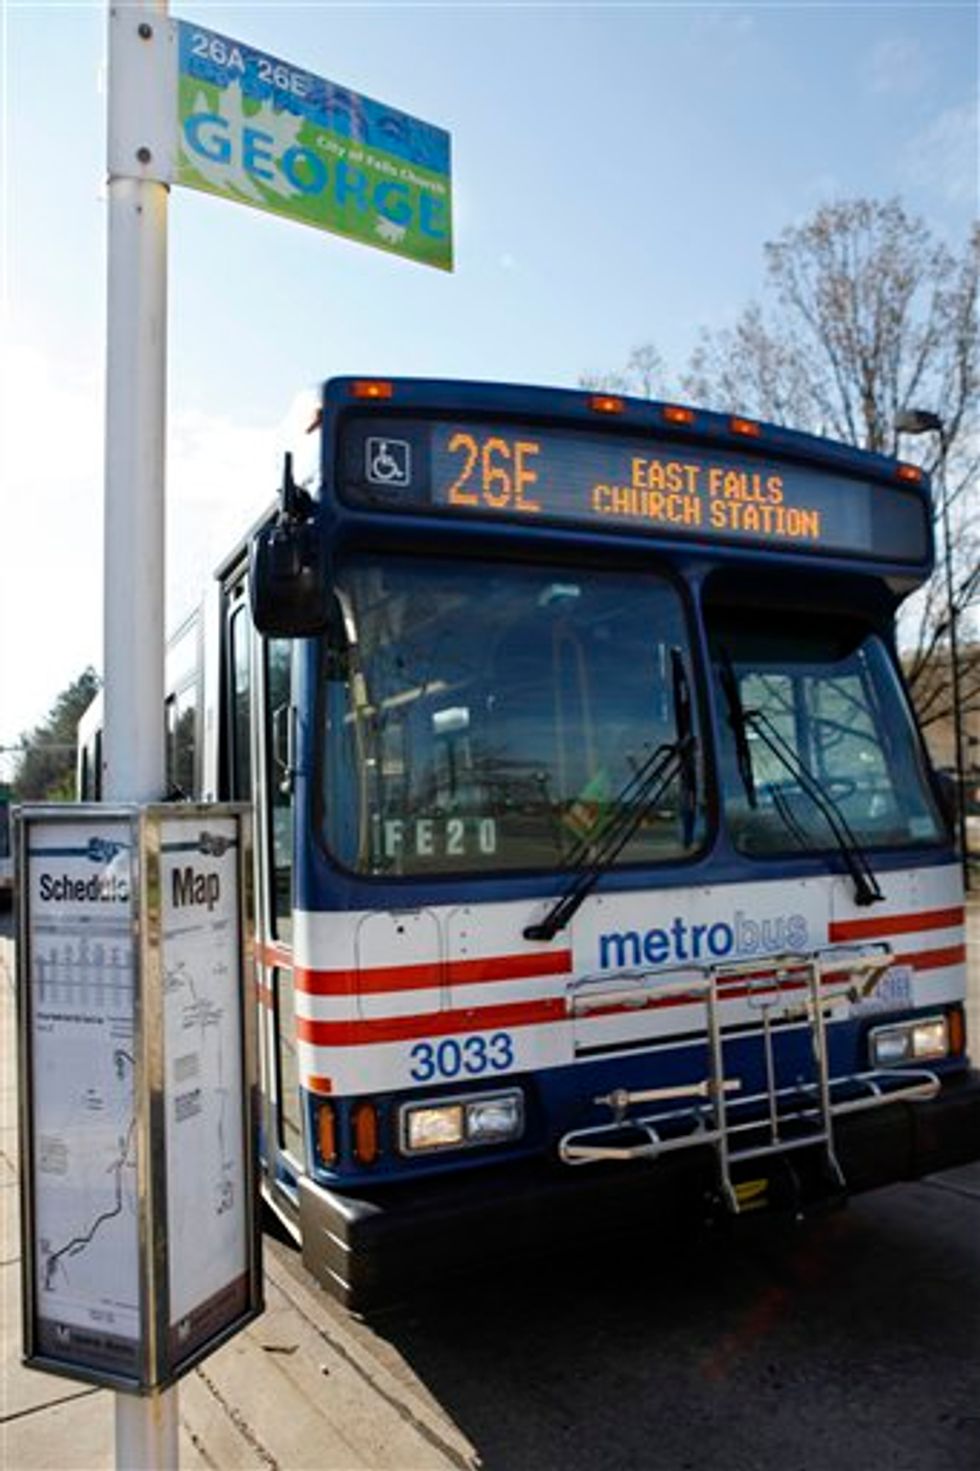 D.C. Pedestrian Dies After Man Allegedly Hijacks Bus, Stabs Driver With Pliers